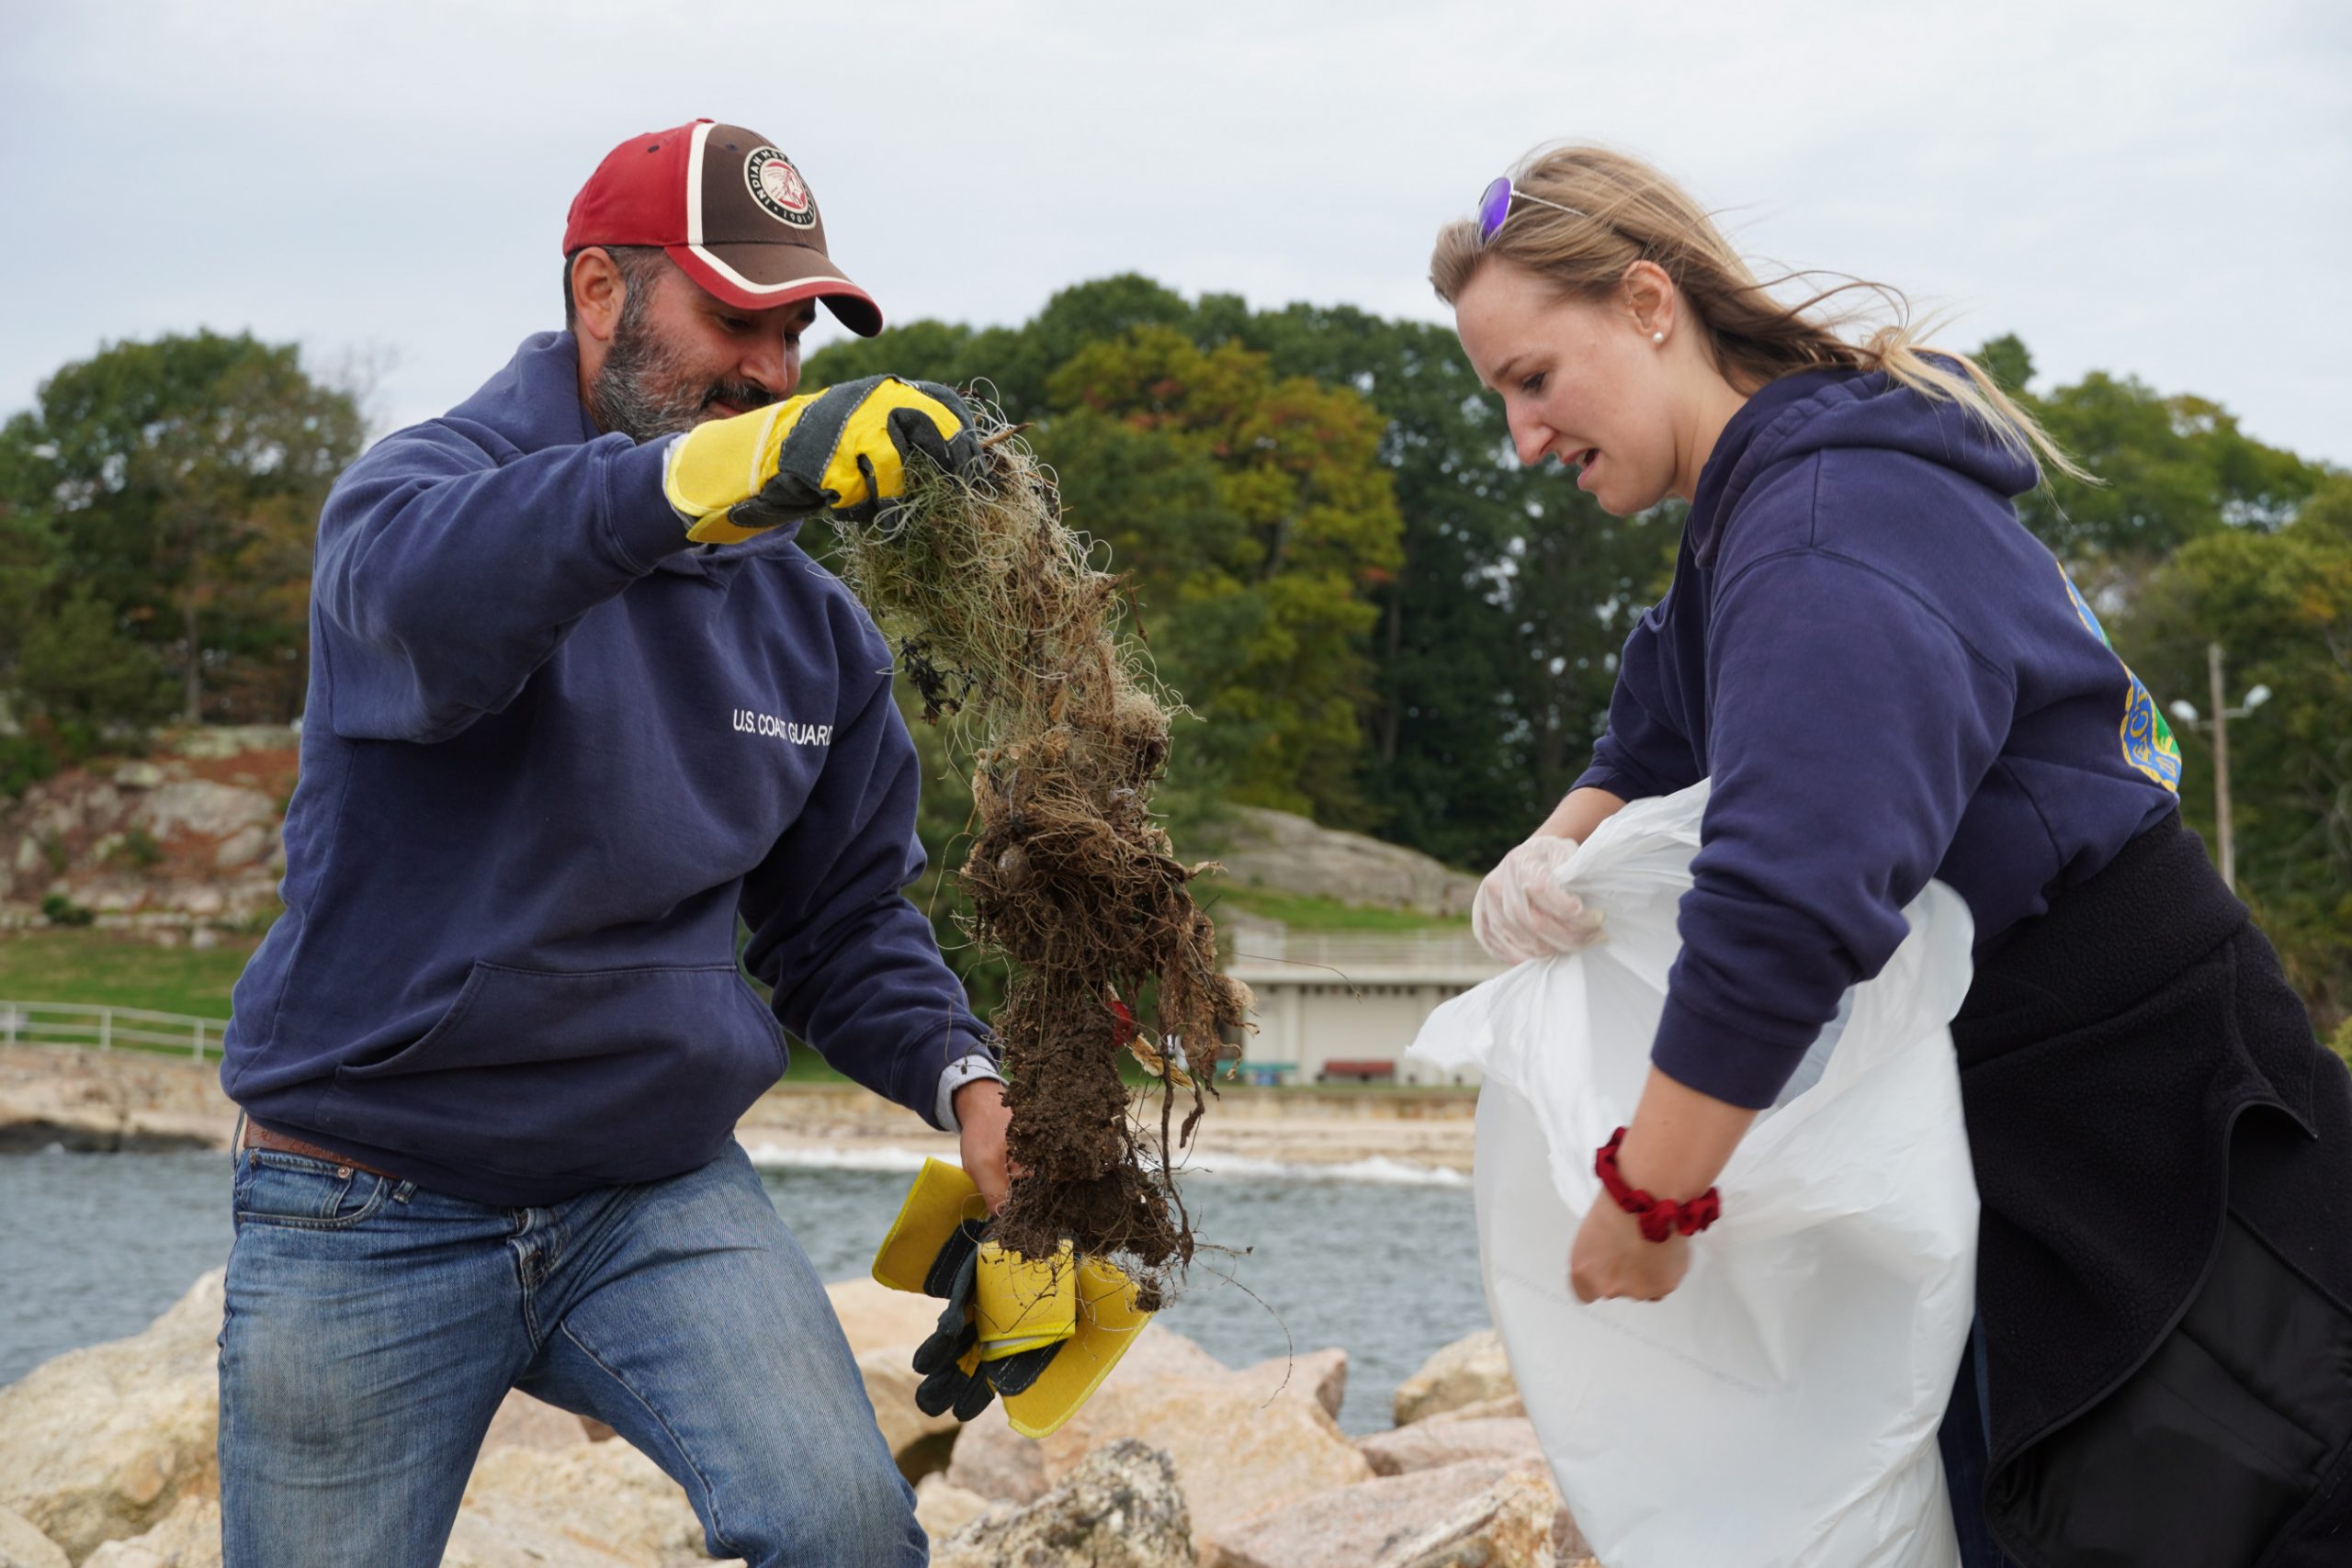 Volunteers collect fishing line during coastal cleanup